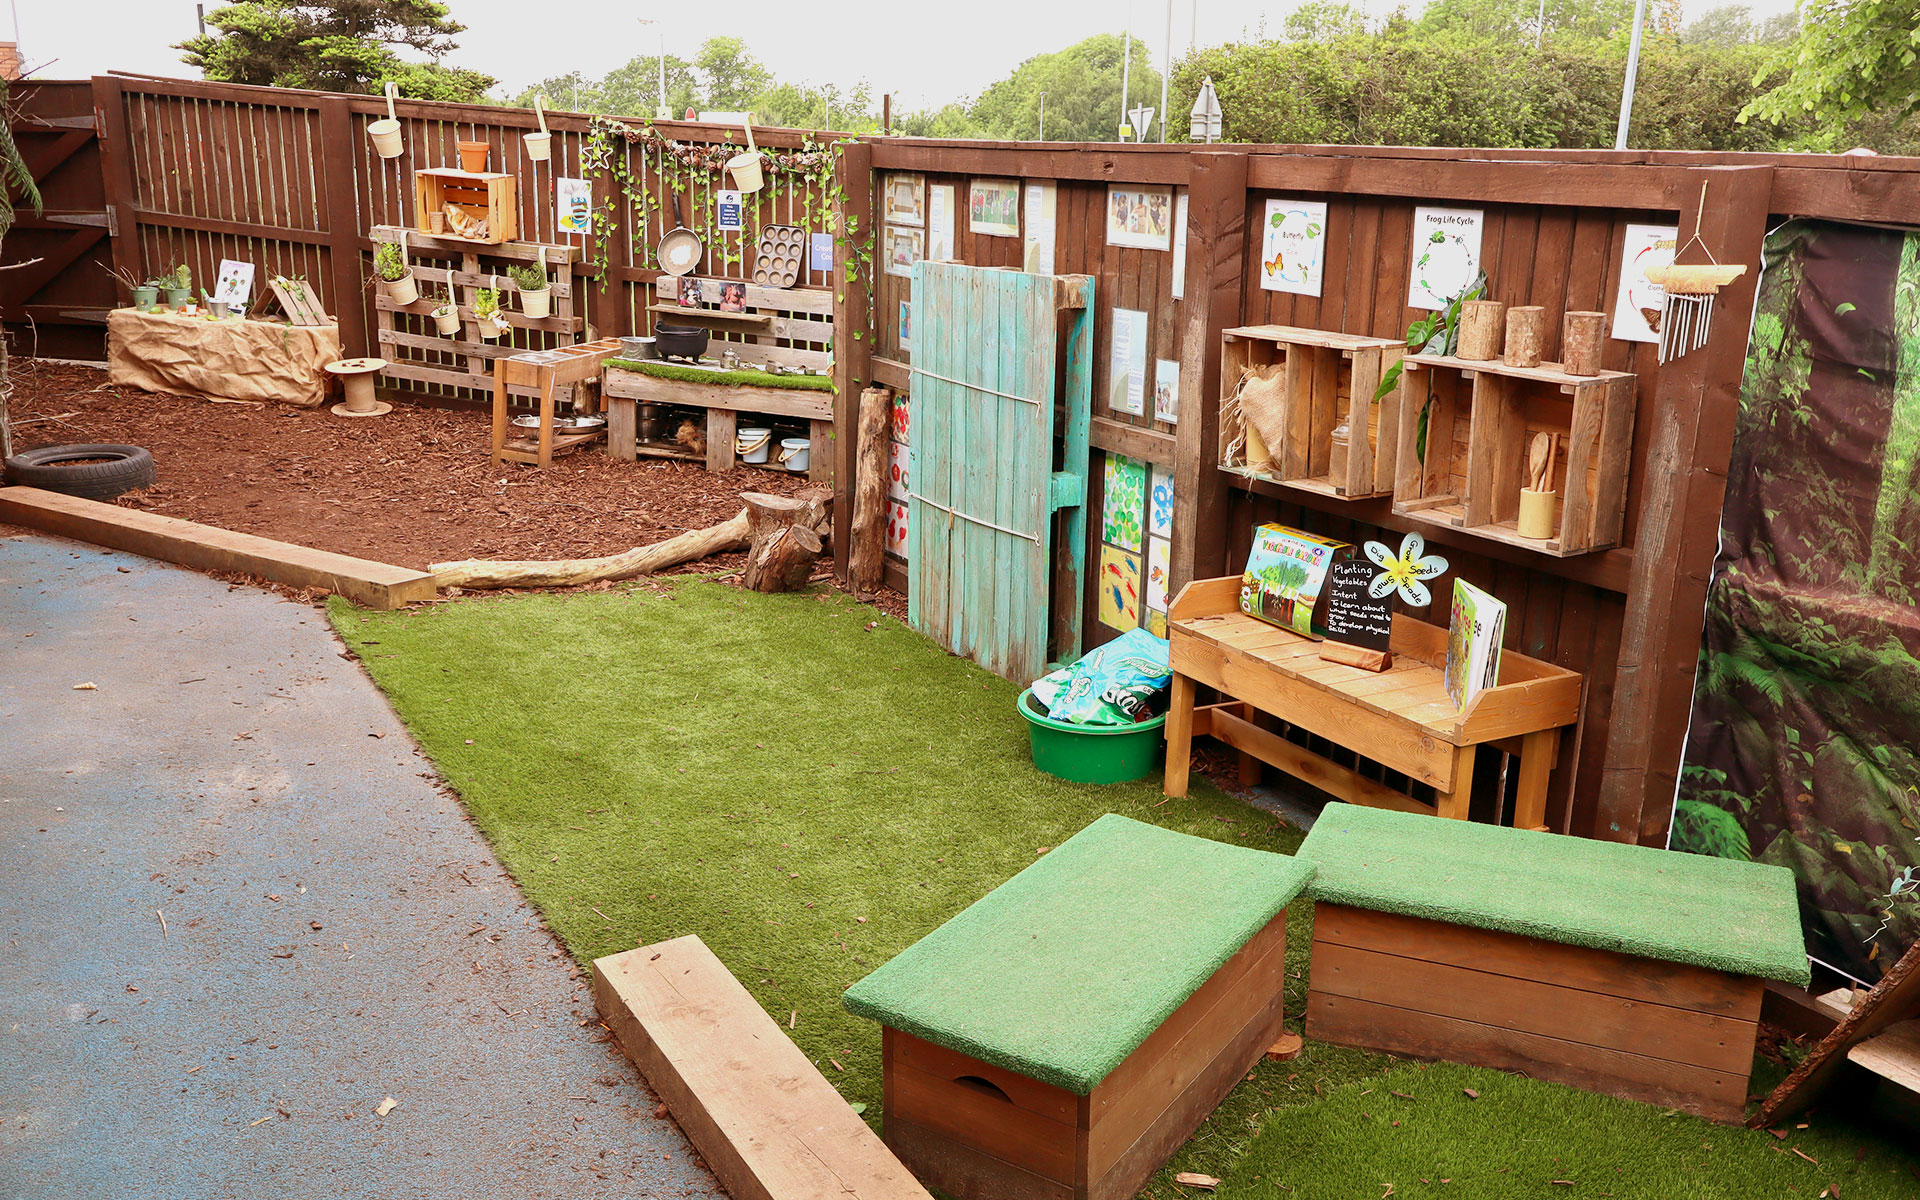 Countess of Chester Day Nursery and Preschool eco garden, forest school